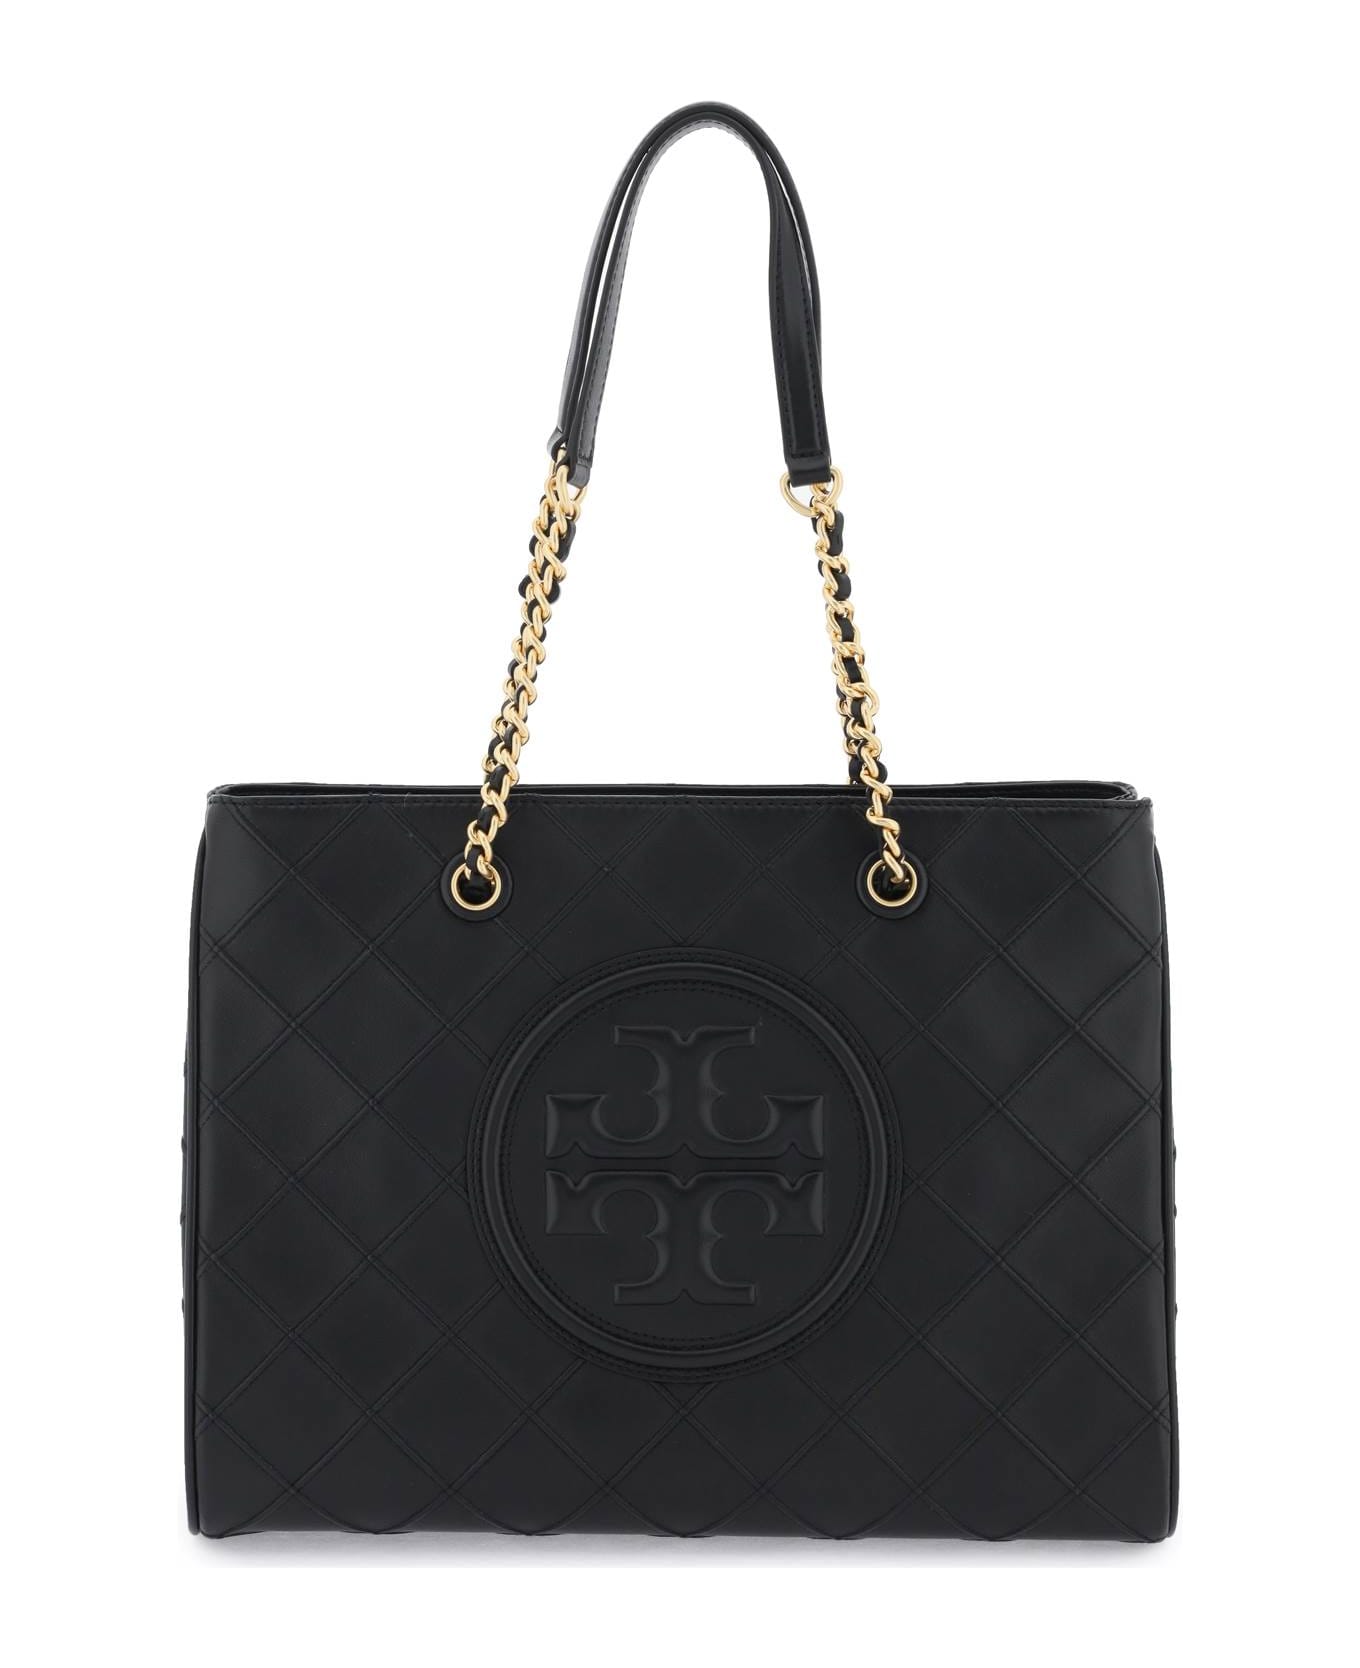 Tory Burch 'fleming Soft' Quilted Black Leather Bag - Black